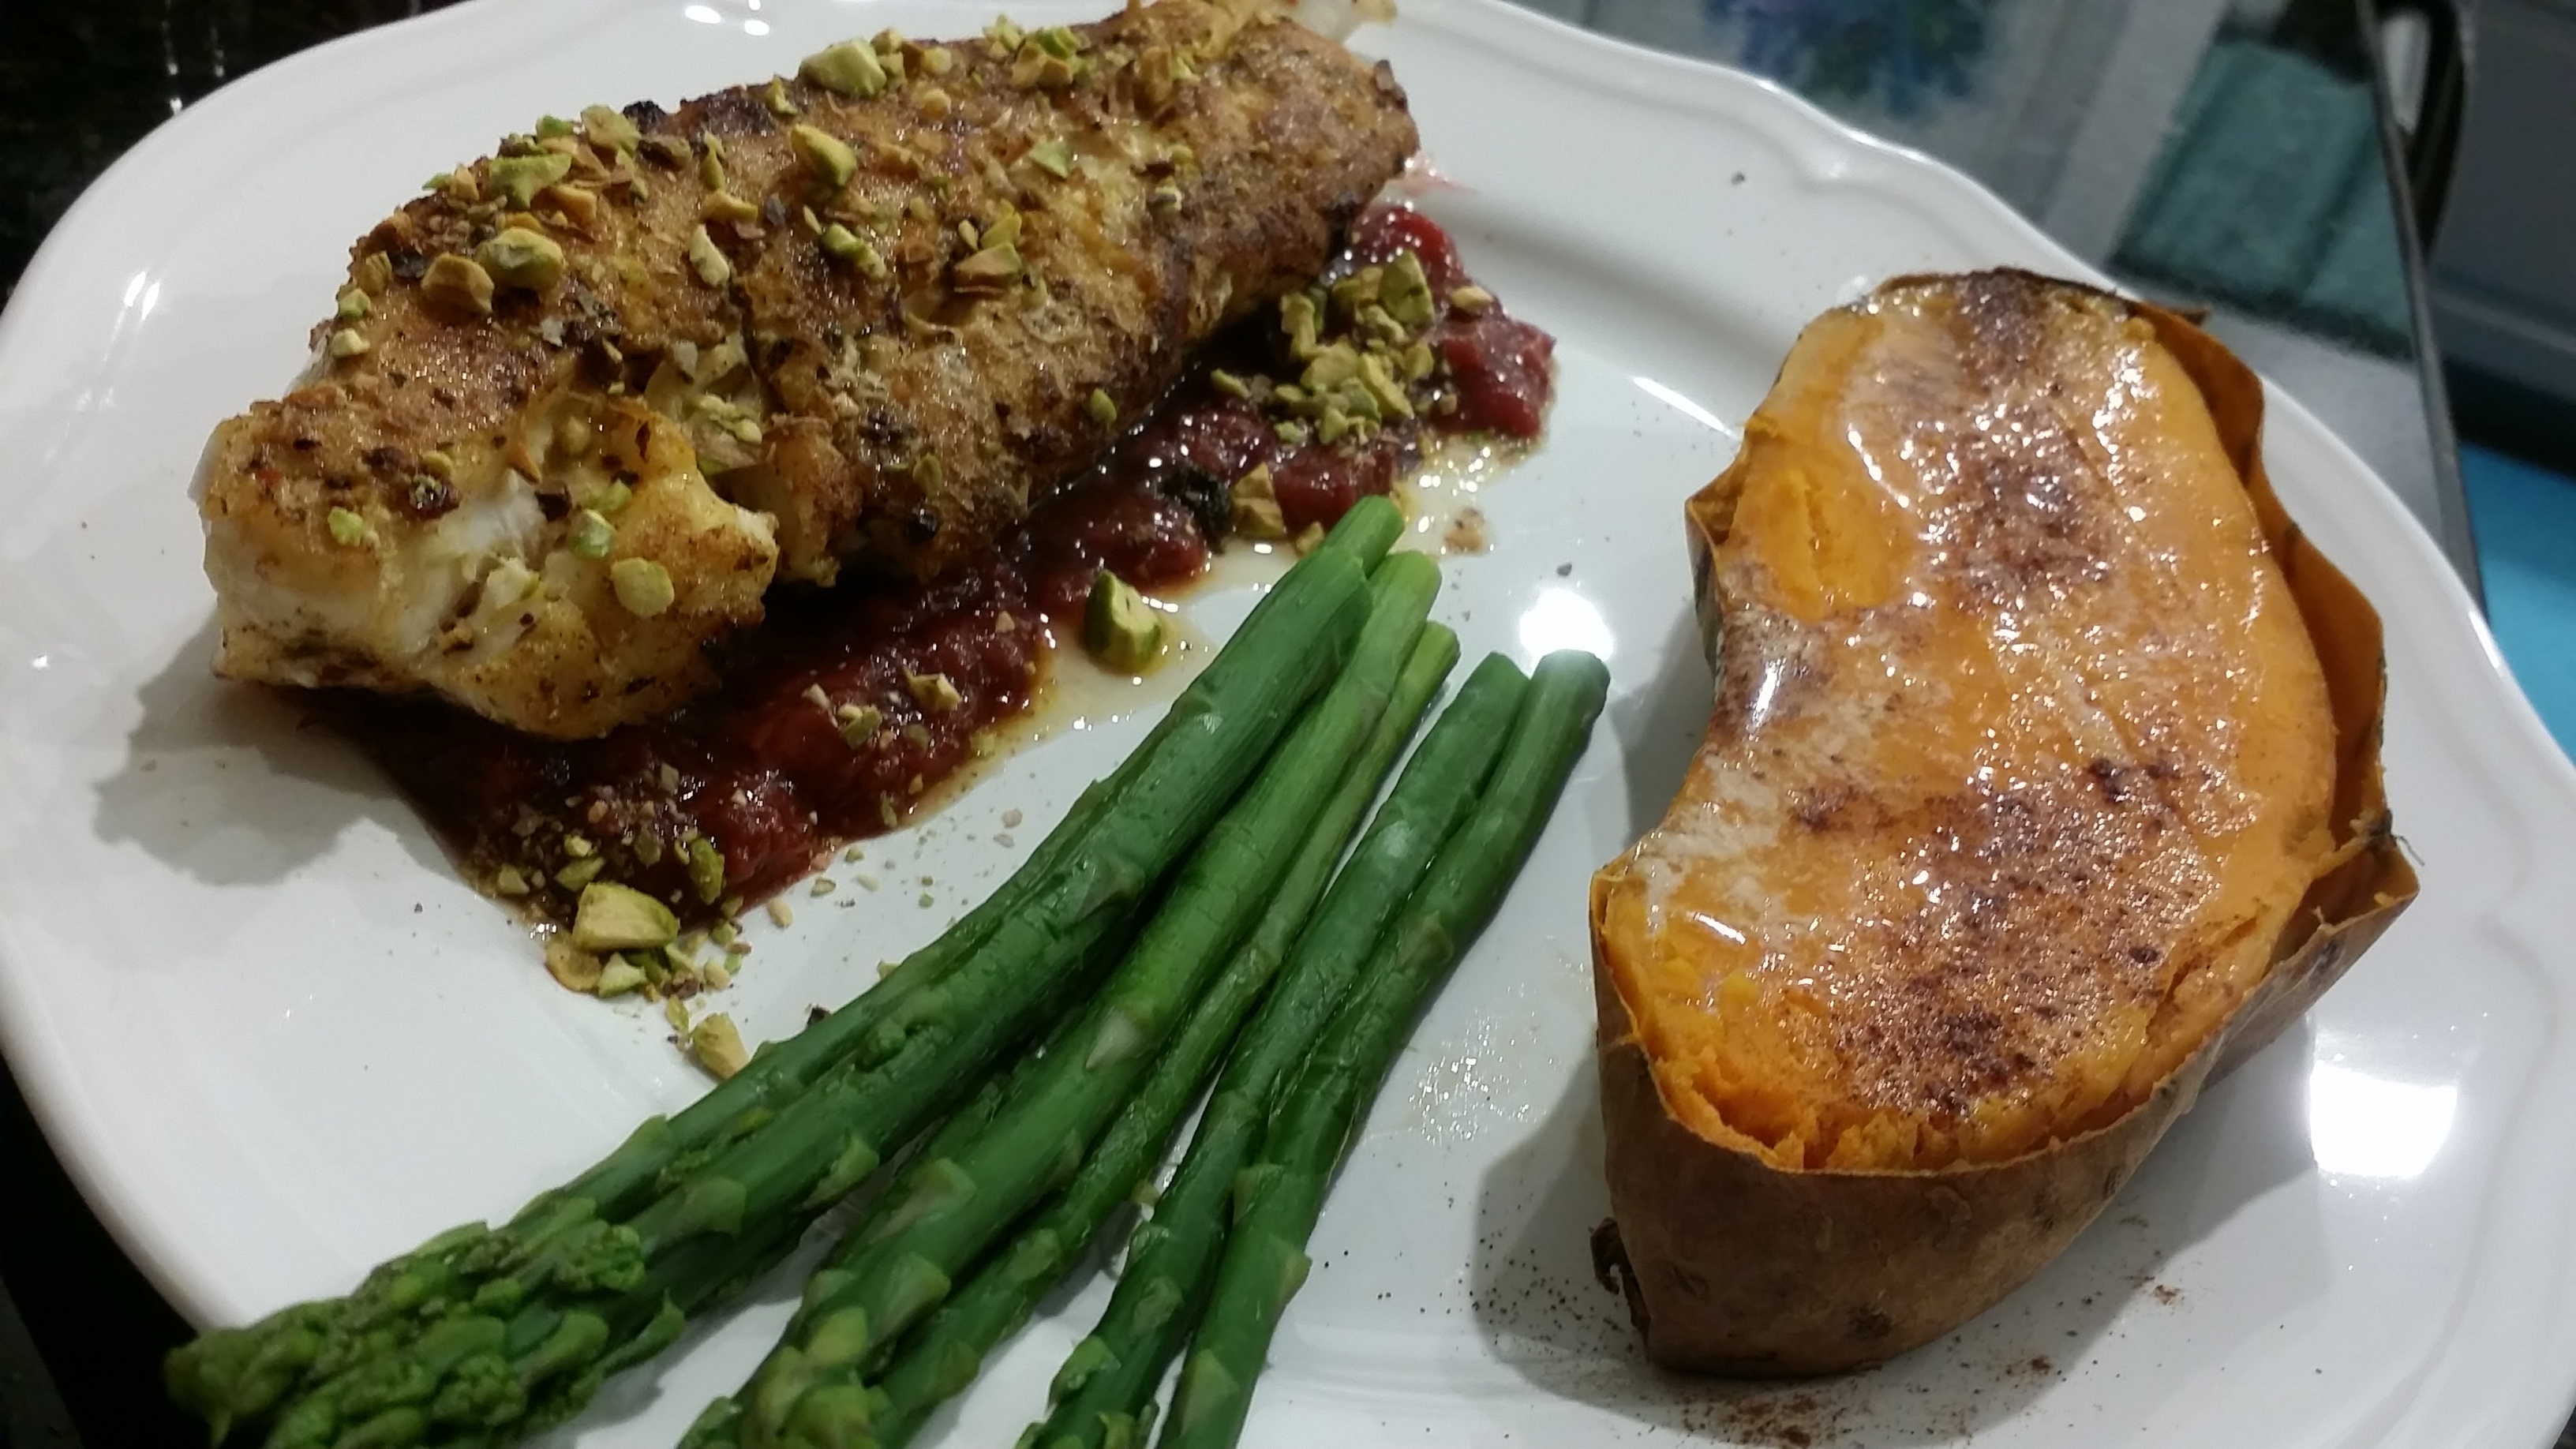 grouper jerked & pan fried - paired with a strawberry ginger compote